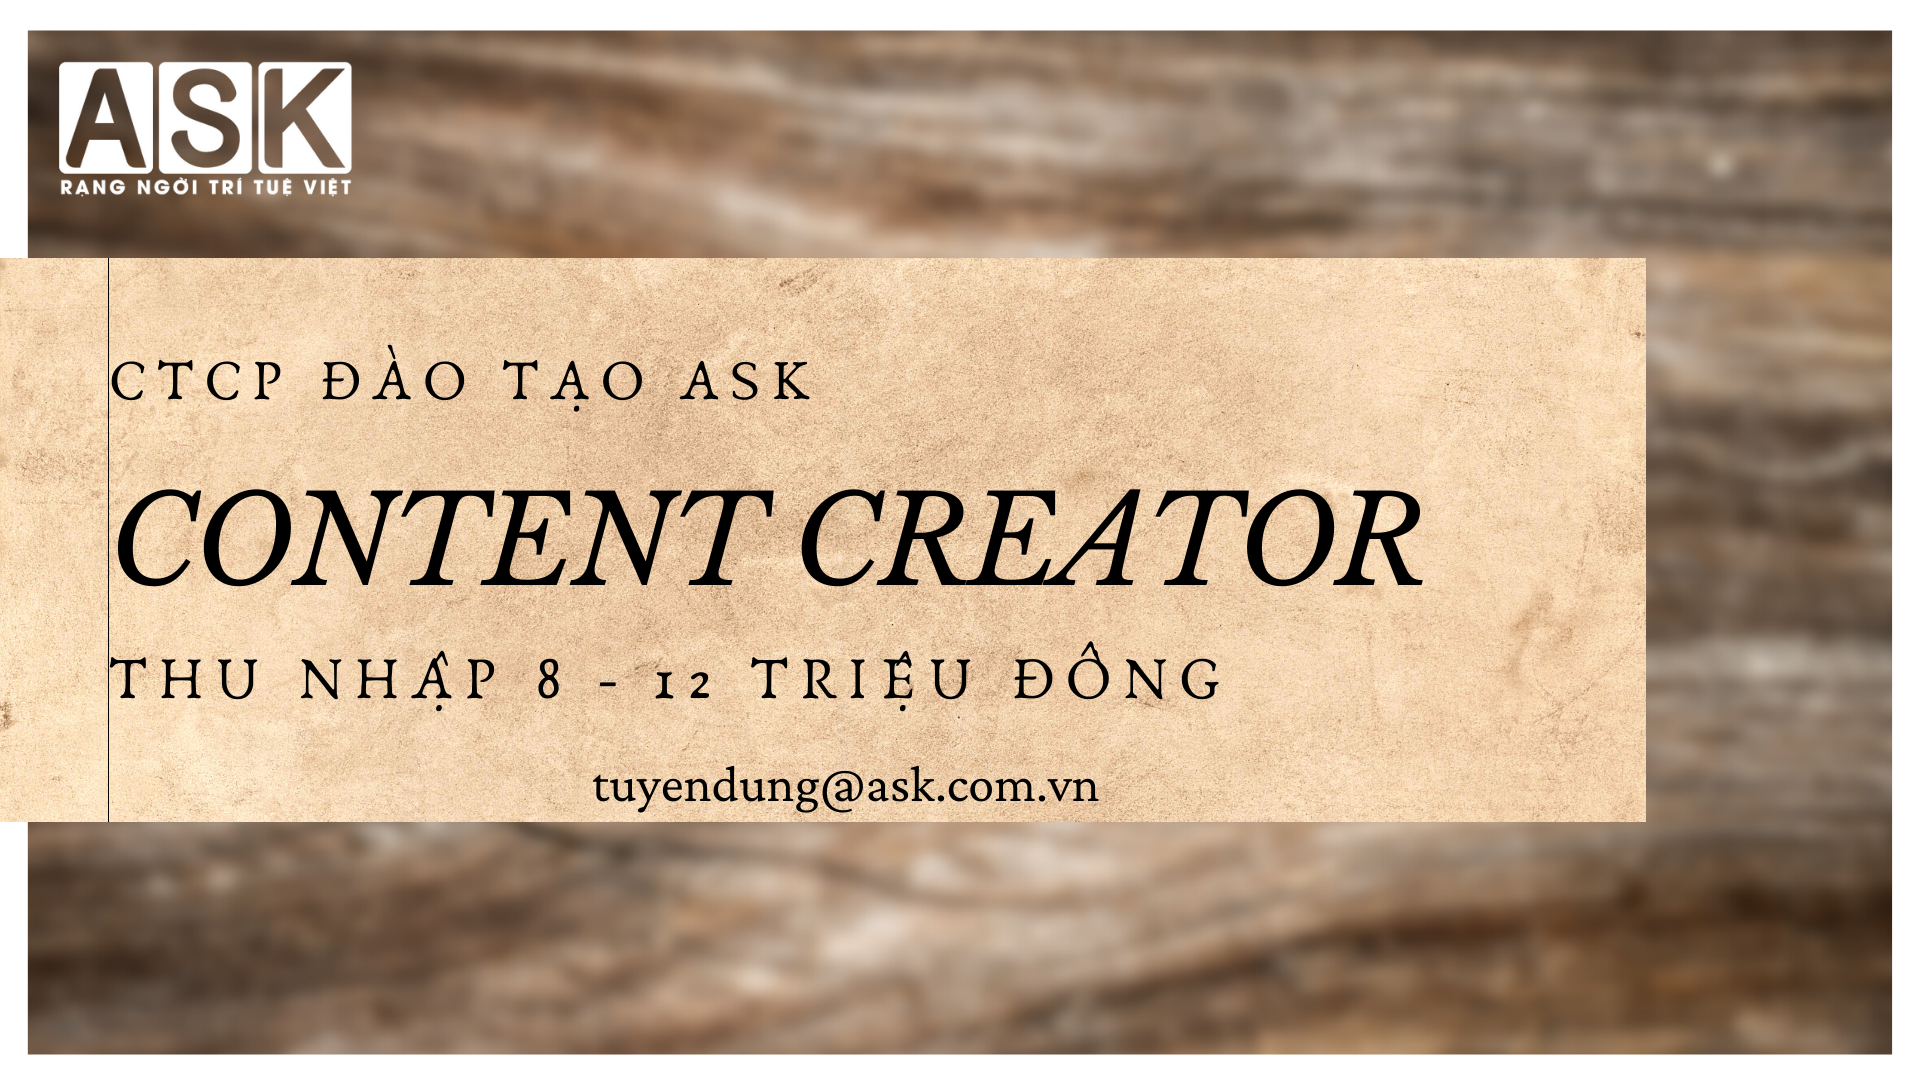 TUYỂN DỤNG CONTENT CREATOR